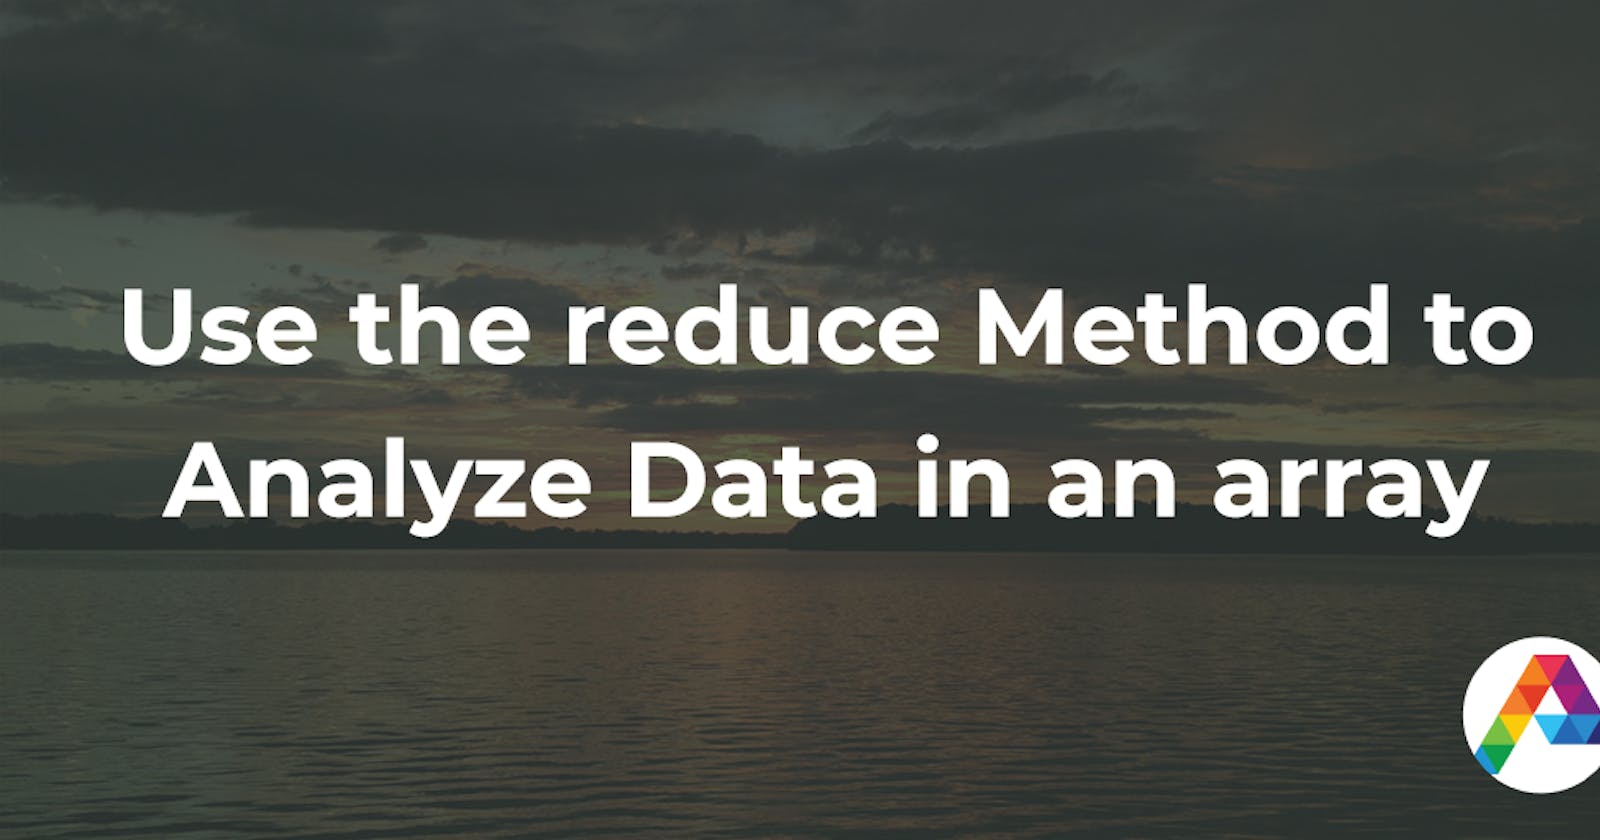 Use the reduce Method to Analyze Data in an array